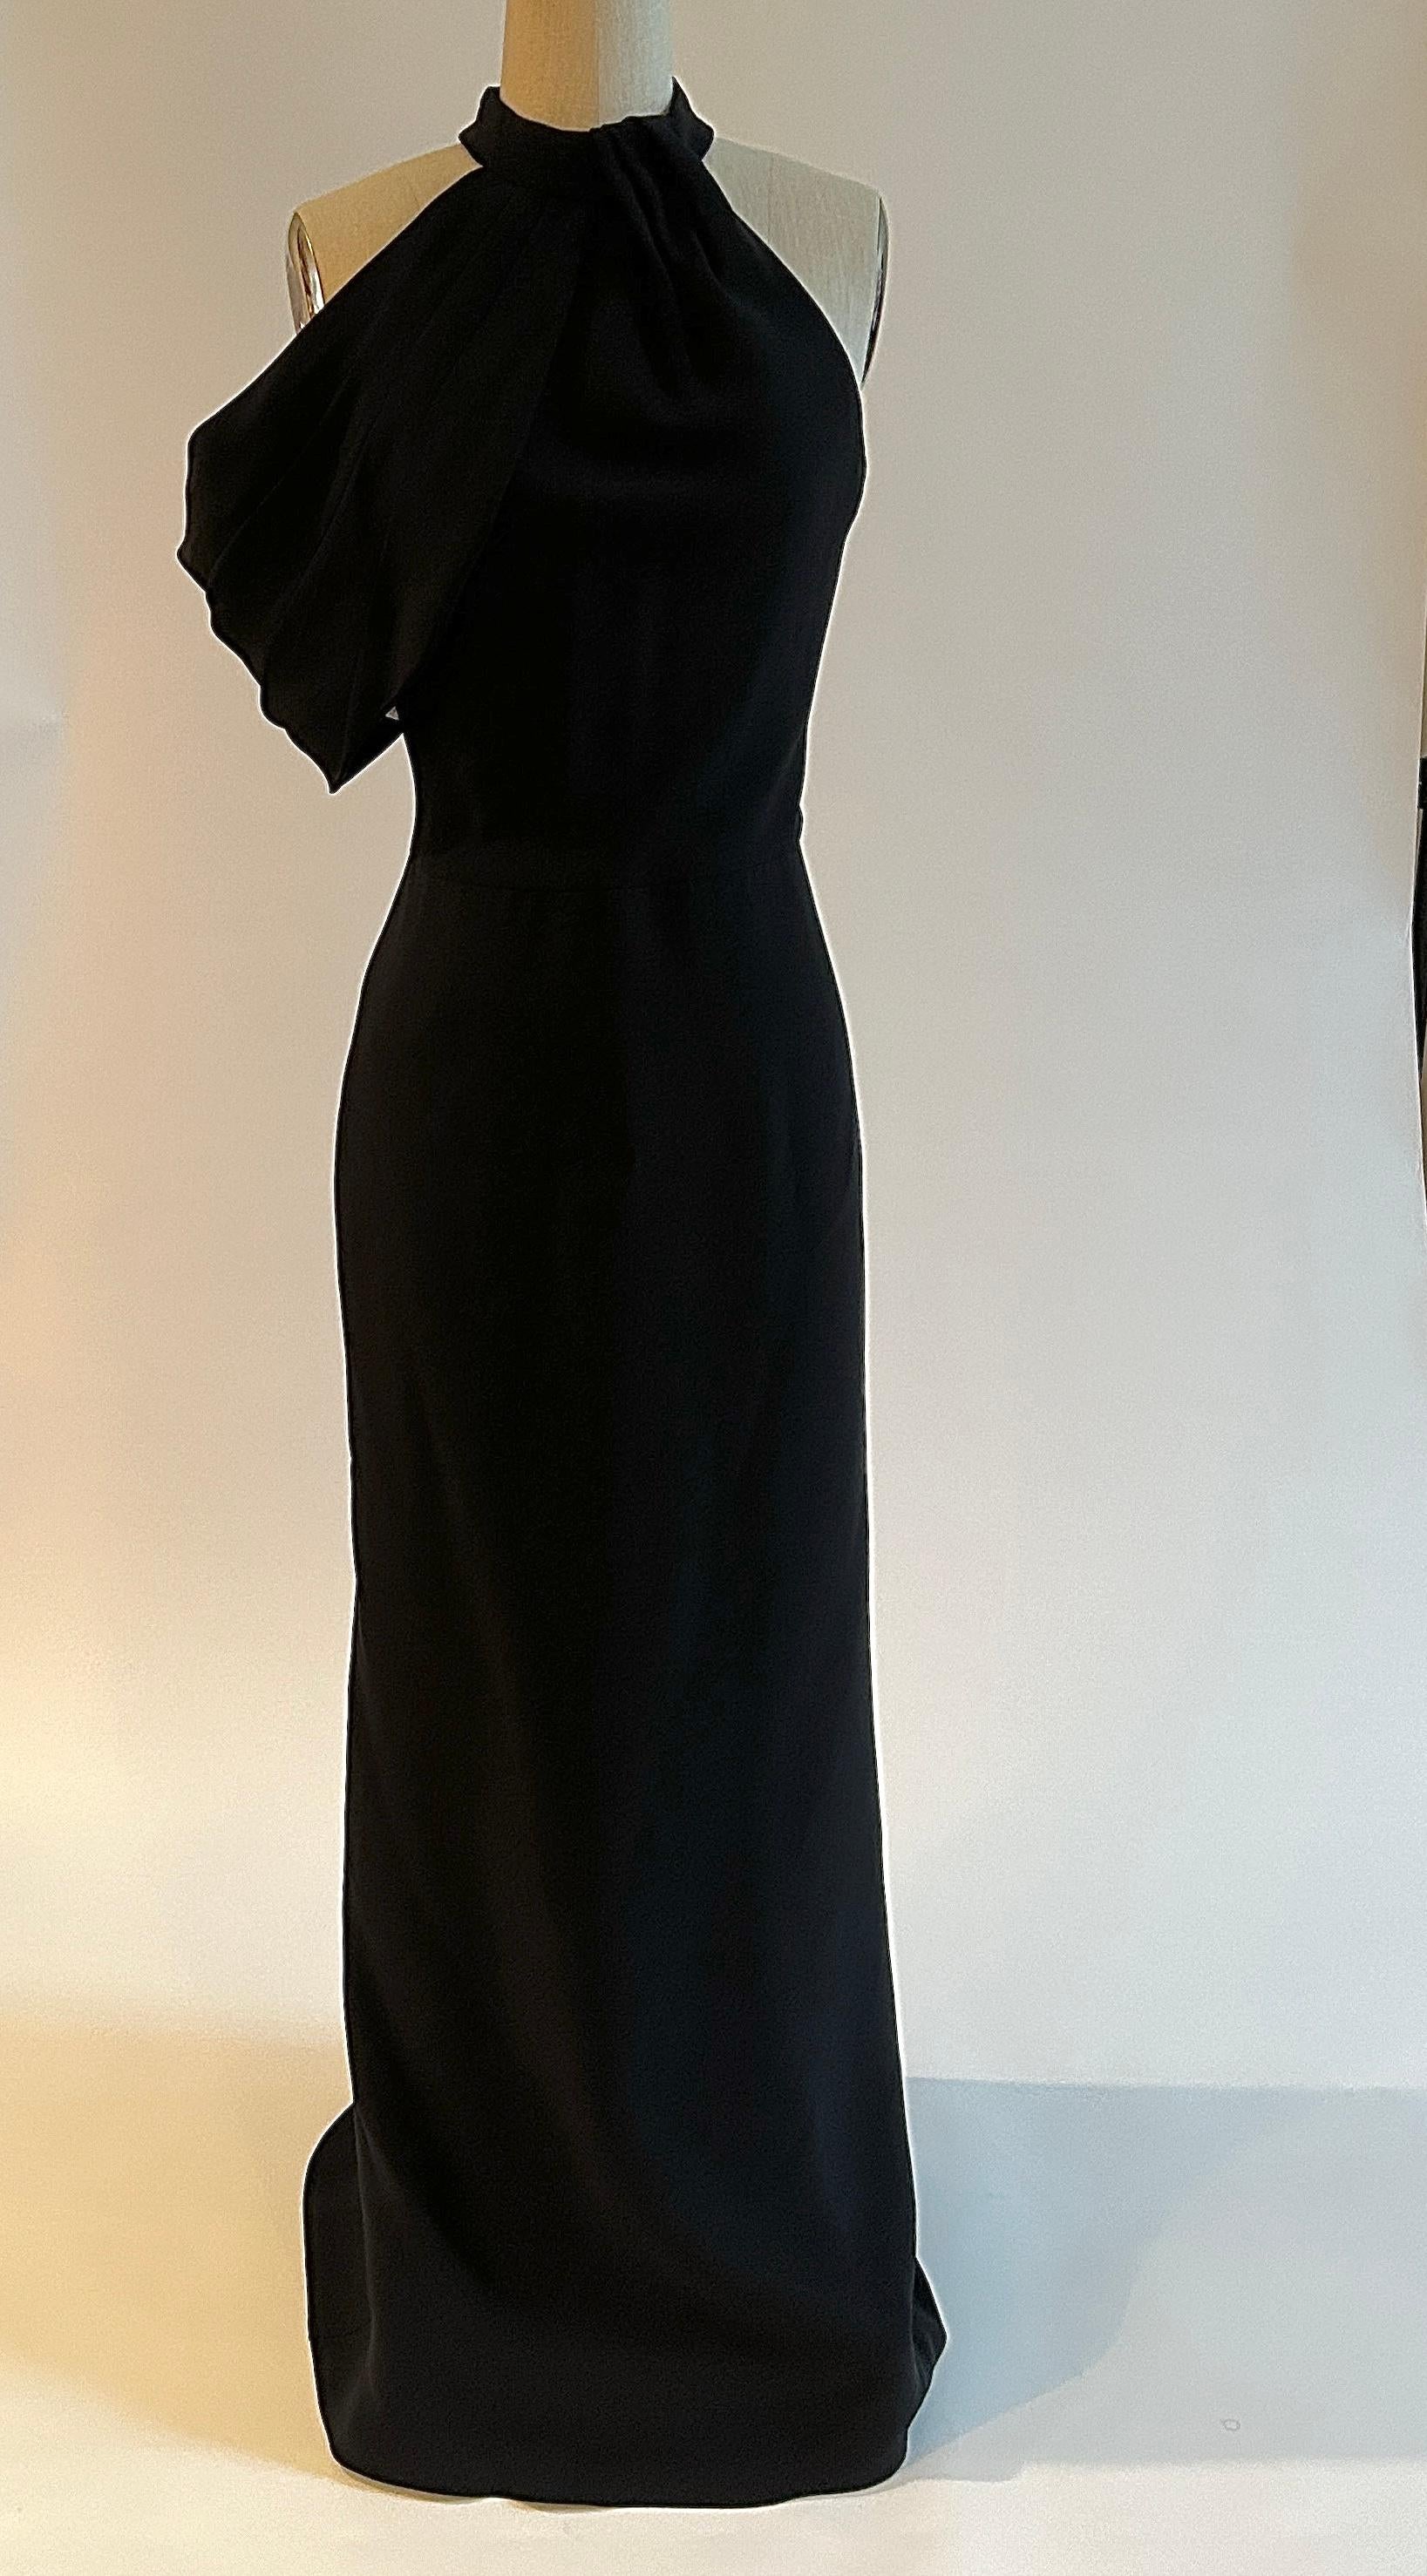 Alexander McQueen 2017 black silk gown with a pleating at color and asymmetrical draped arm detail. Back zip with two snaps and buttons at back neck. 

100% silk.
Fully lined in 100% silk. 

Made in Italy.

Size 40 IT, approximate US 4. See